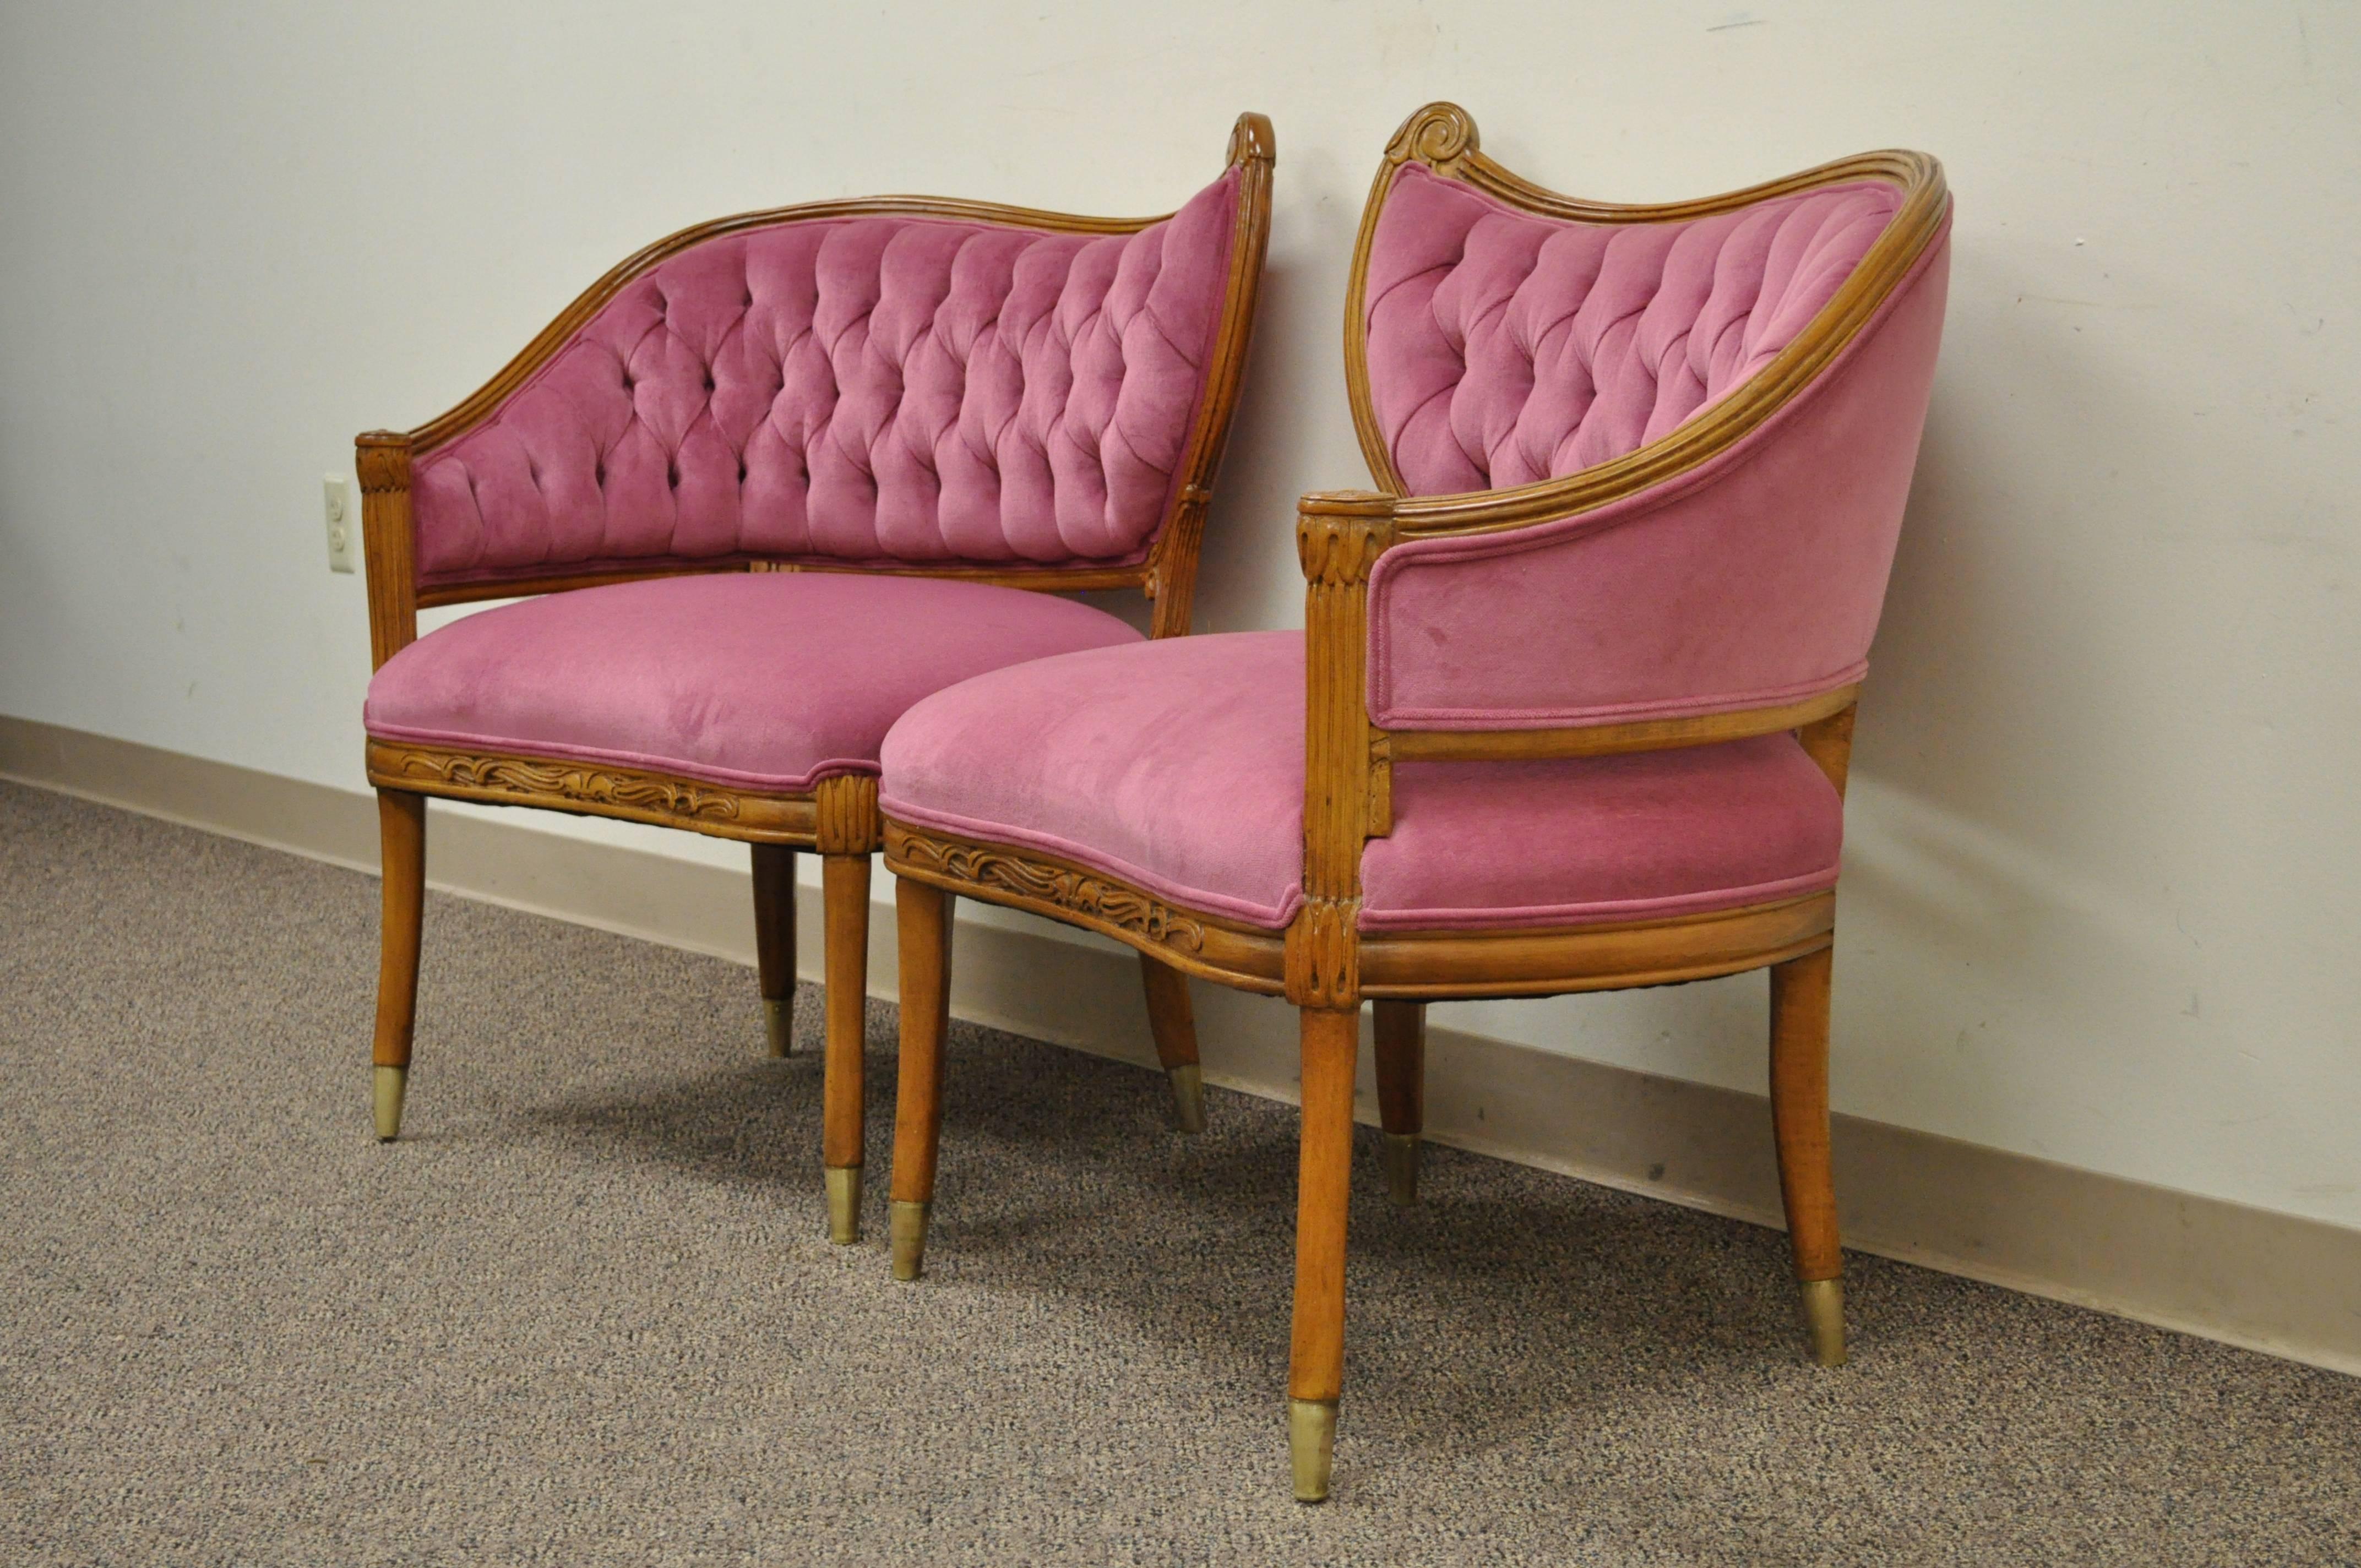 Wonderful pair of vintage Hollywood Regency French style lounge chairs. The pair features curved backs, brass capped feet, tapered legs, reeded carvings and very elegant form. The maker is unconfirmed but the form and quality is very similar to